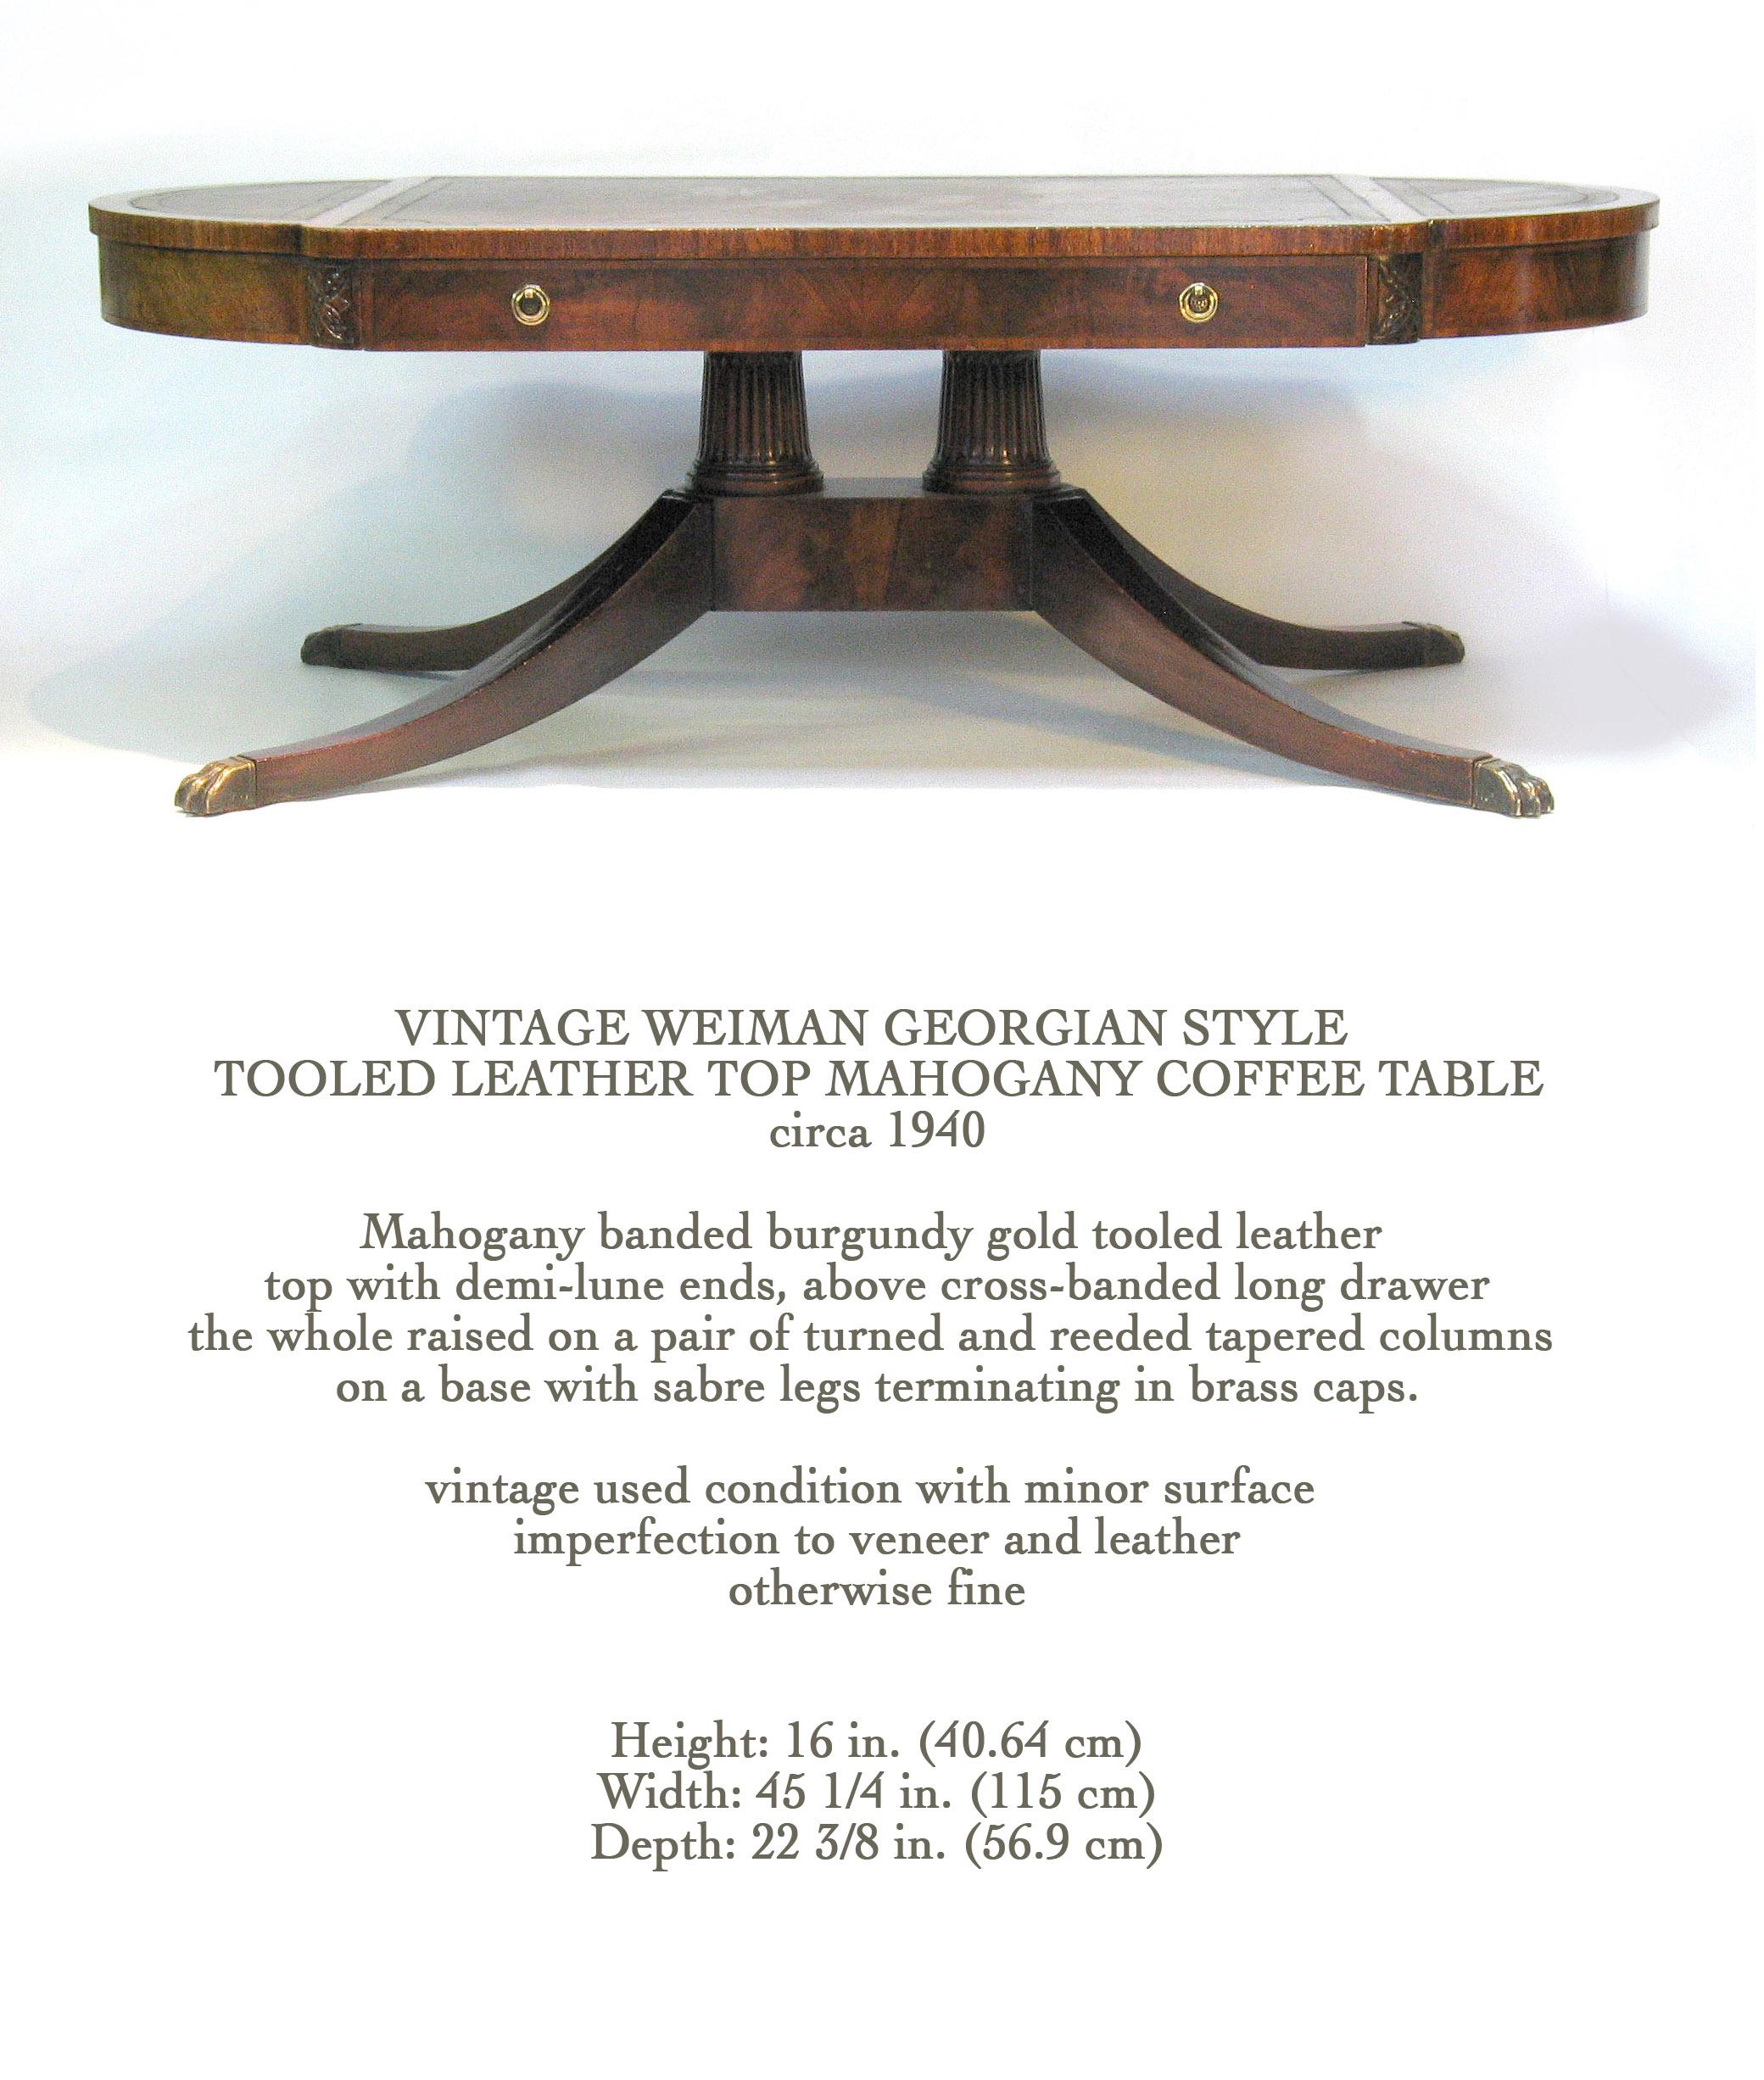 VINTAGE WEIMAN GEORGIAN STYLE 
TOOLED LEATHER TOP MAHOGANY COFFEE TABLE
circa 1940

Mahogany banded burgundy gold tooled leather 
top with demi-lune ends, above cross-banded long drawer
the whole raised on a pair of turned and reeded tapered